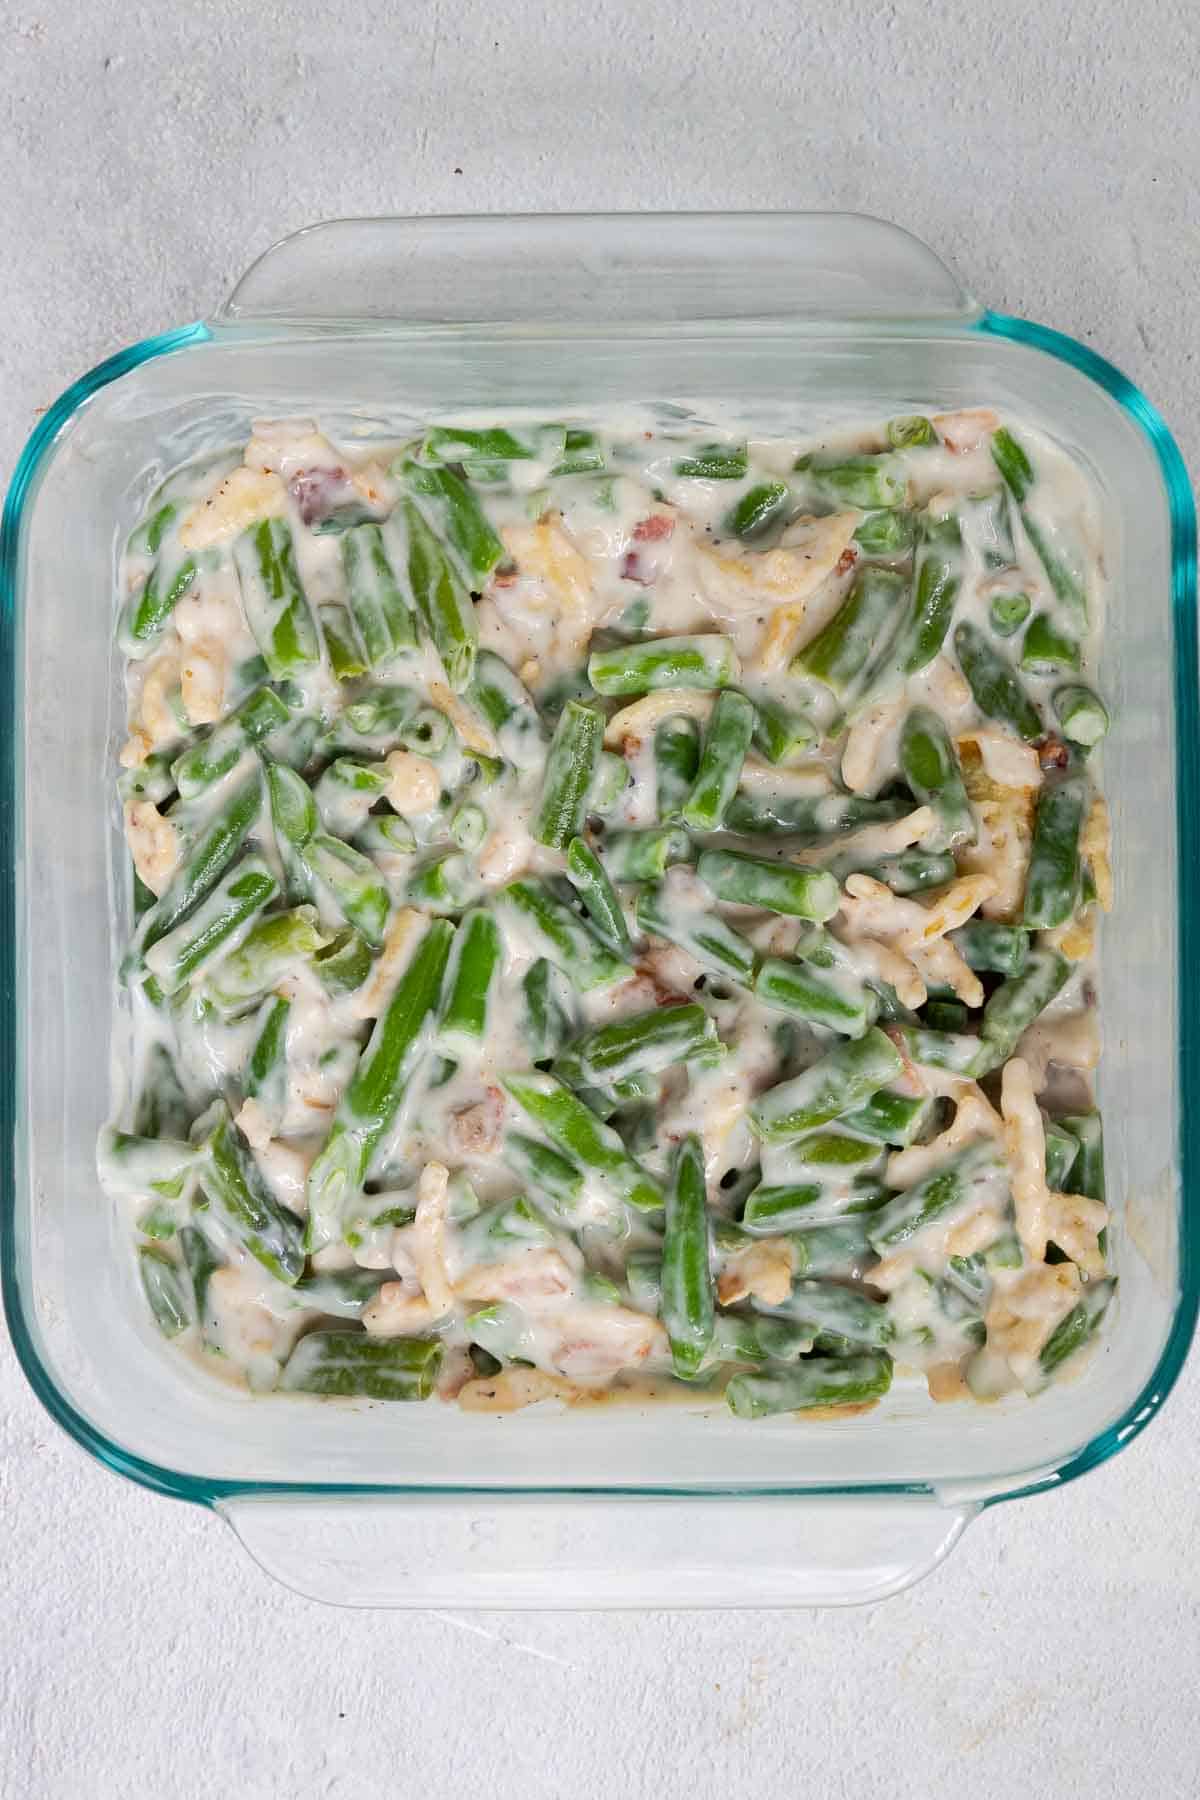 The green bean mixture is mixed directly in the 8 by 8 inch baking dish.